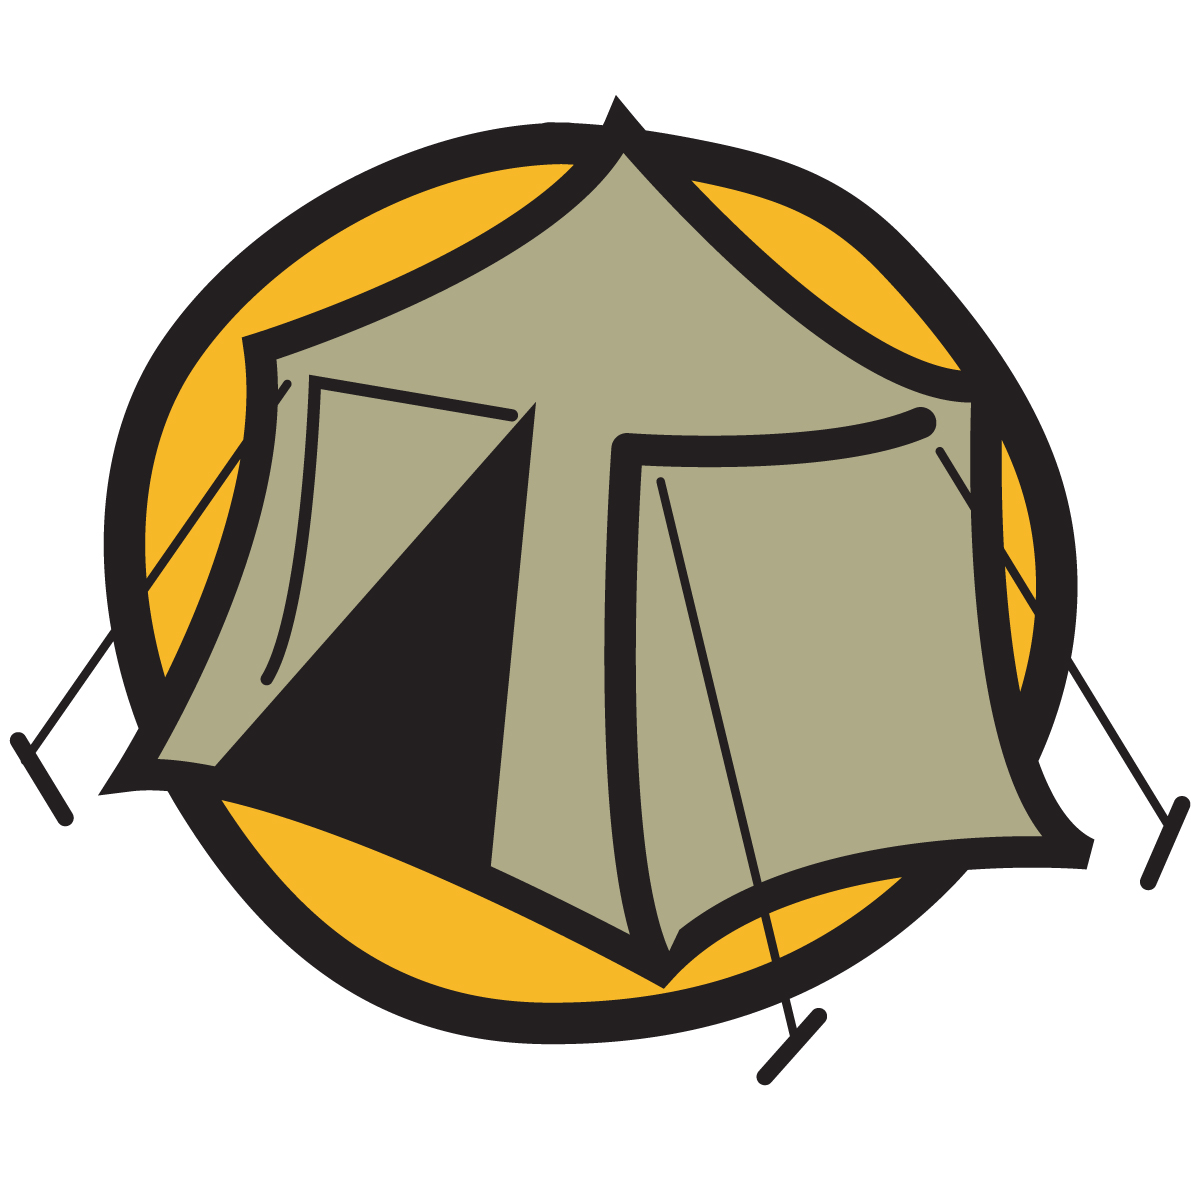 Tent And Campfire Clipart | Clipart library - Free Clipart Images